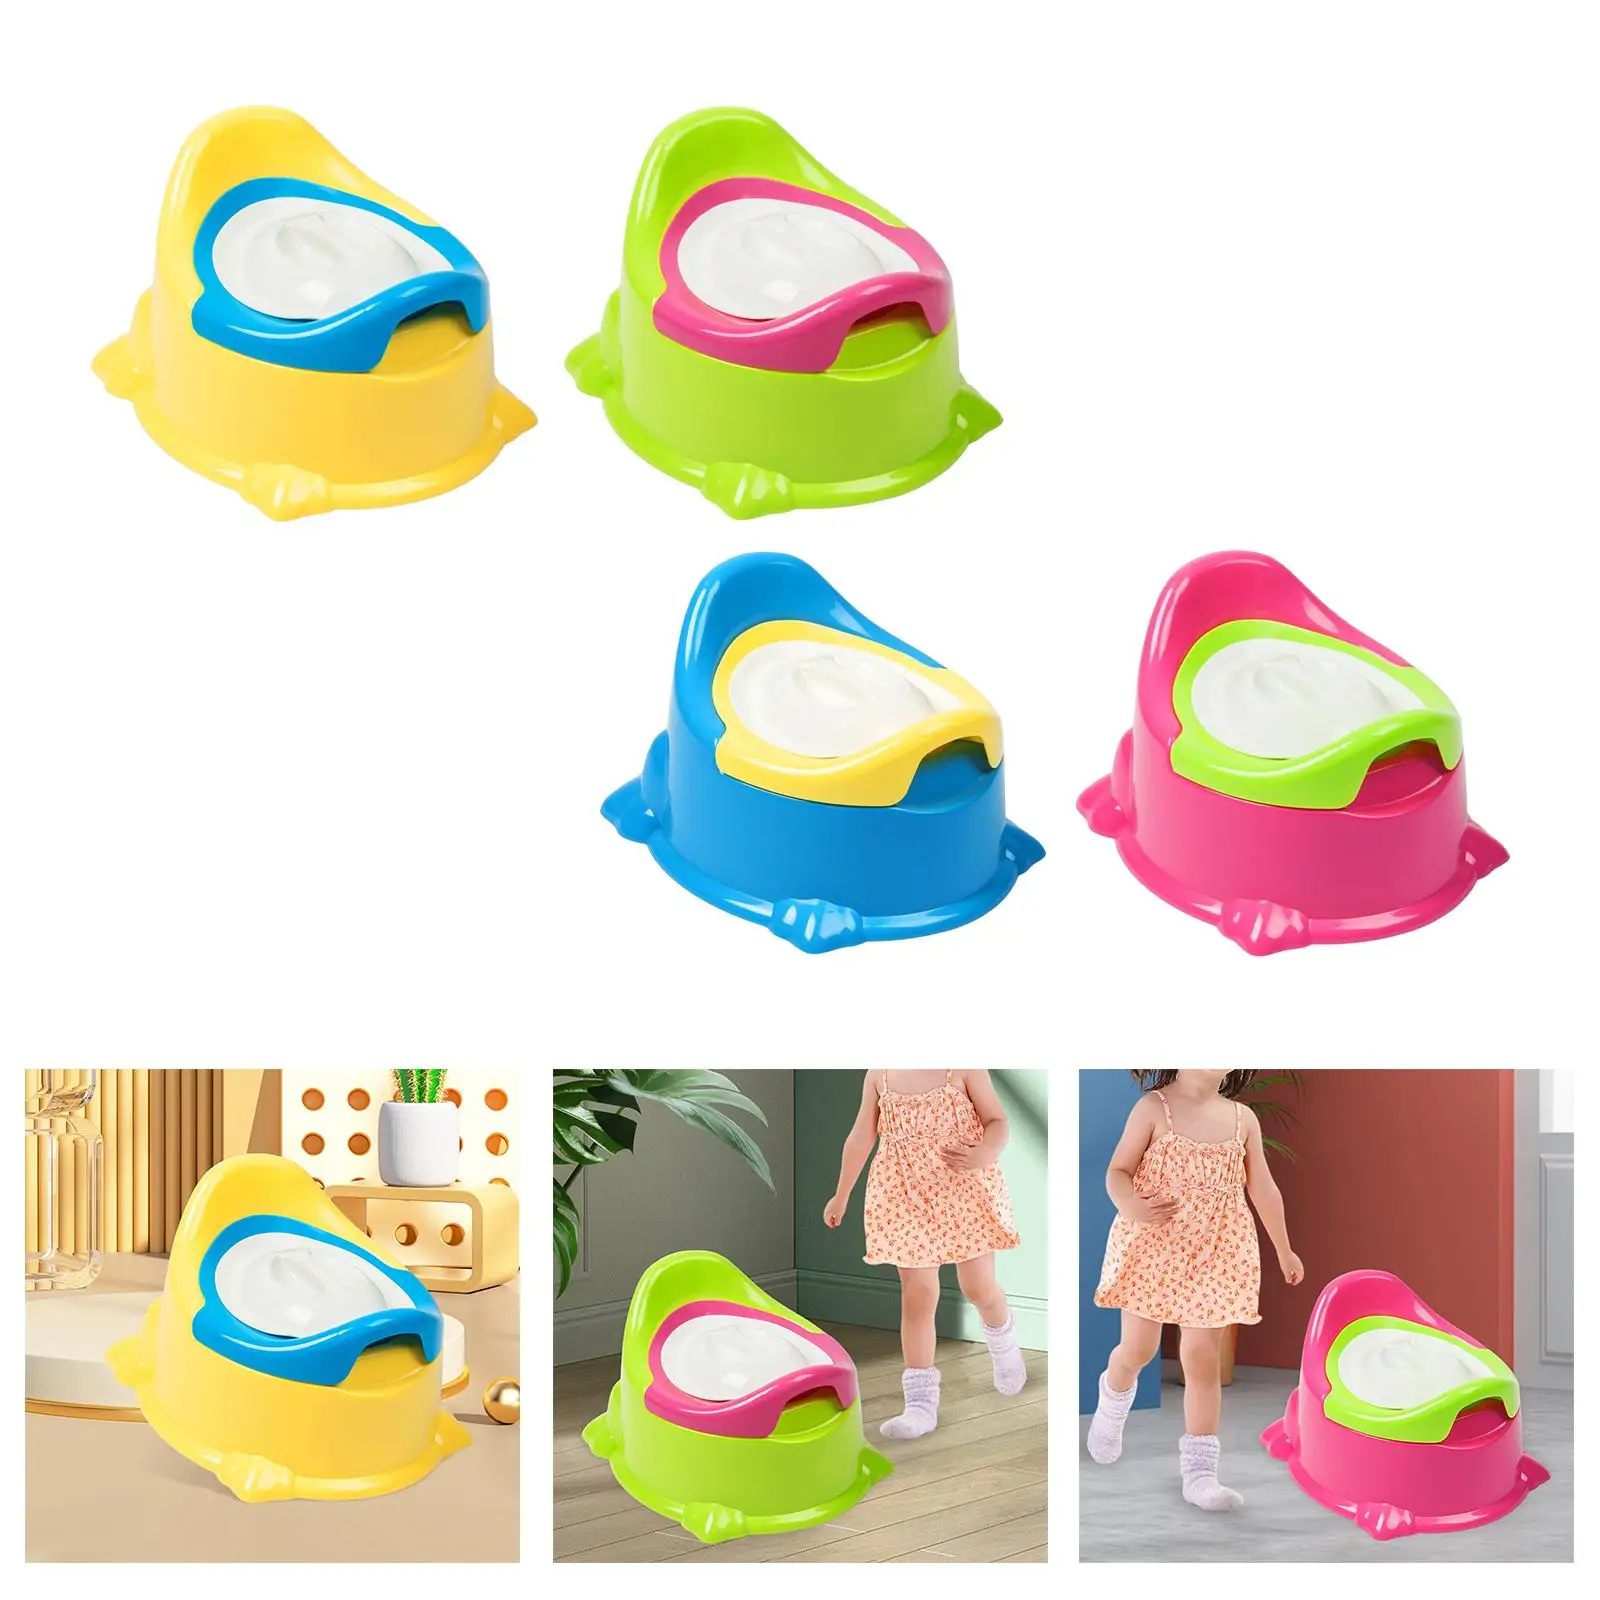 Portable Childrens Potty Kids Training Toilet Seat with Handle Baby Potty Trainer Toilet Chair Seat for Babies 6-12 Month Baby